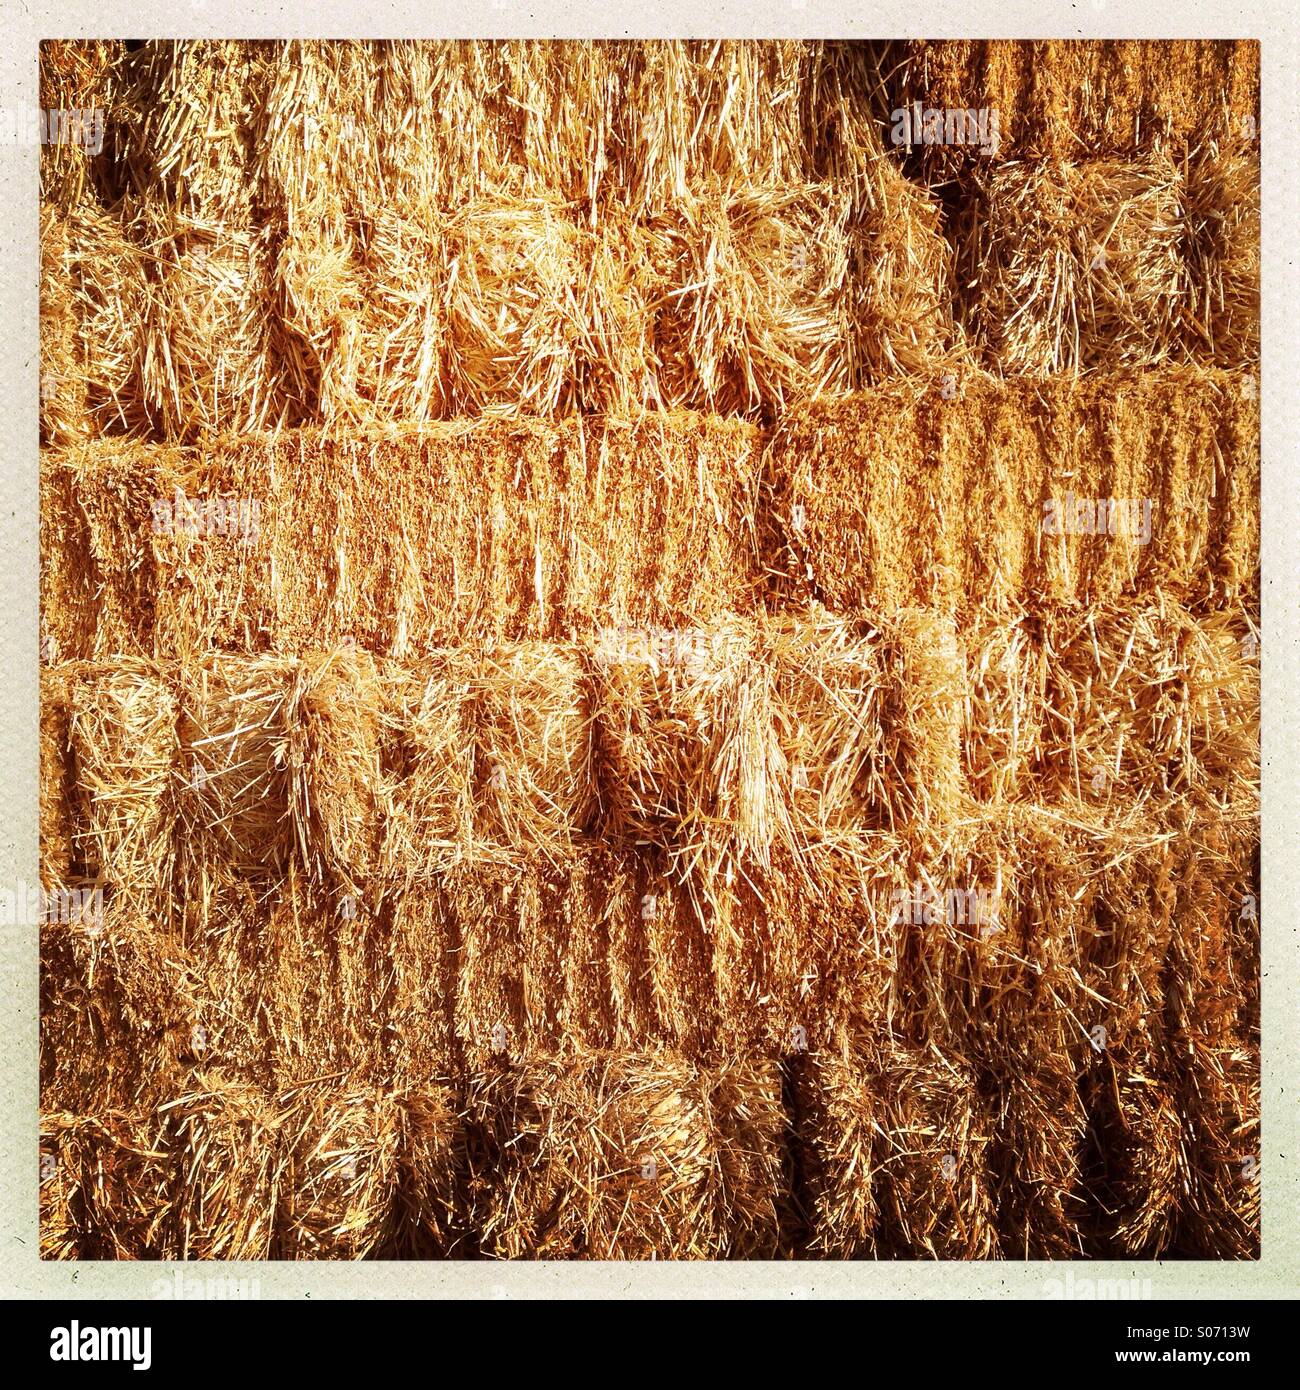 Traditional small square straw bales in a stack. Yorkshire UK Stock Photo